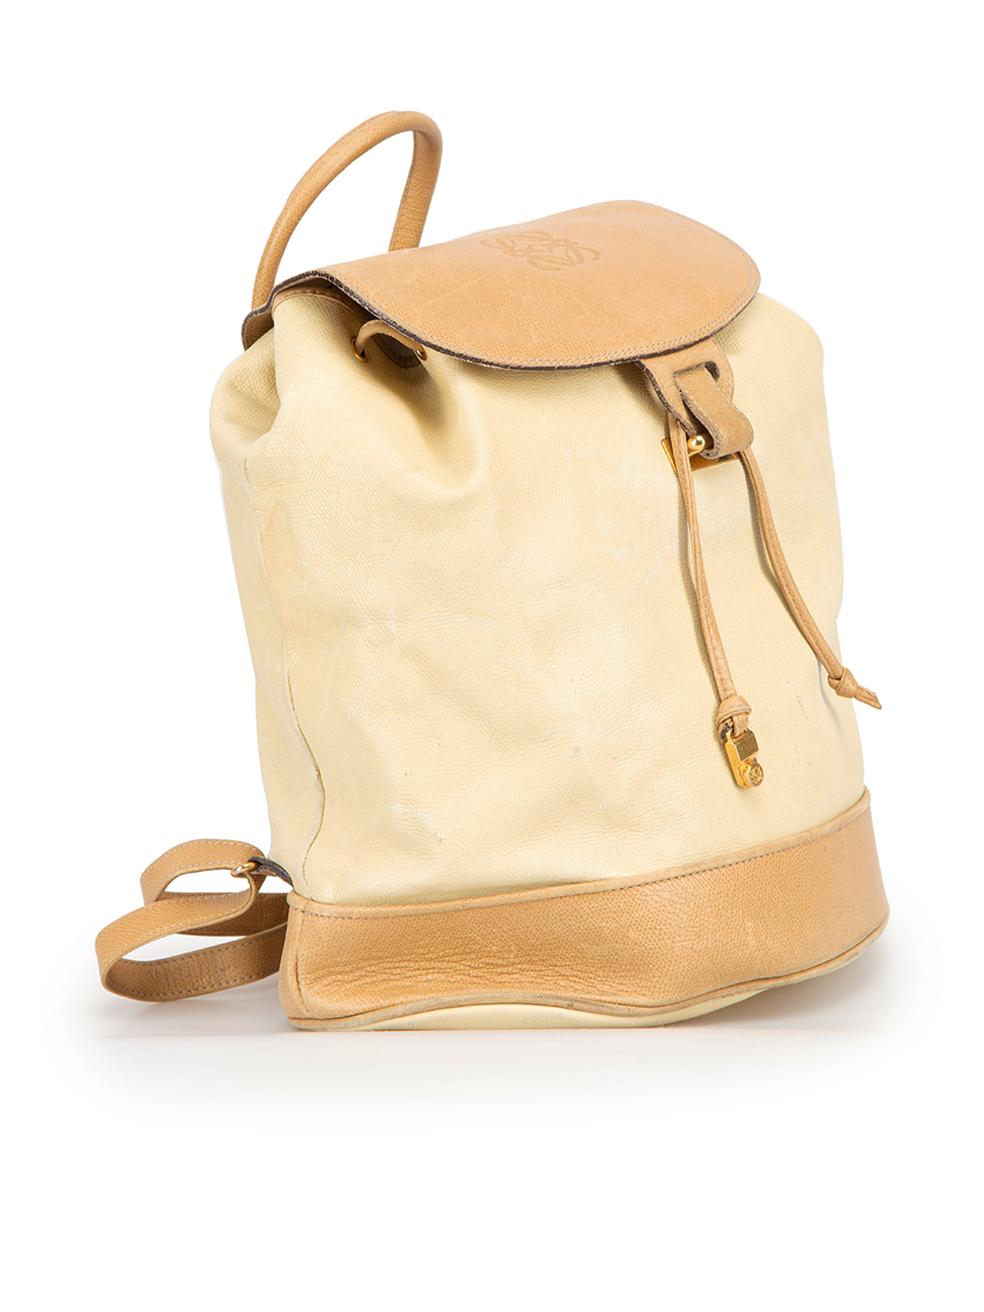 CONDITION is Good. General wear to bag is evident. Moderate signs of wear to the front, back, base and shoulder straps with scuffs and discoloured marks on this used Loewe designer resale item.





Details


Vintage

Yellow

Leather

Medium